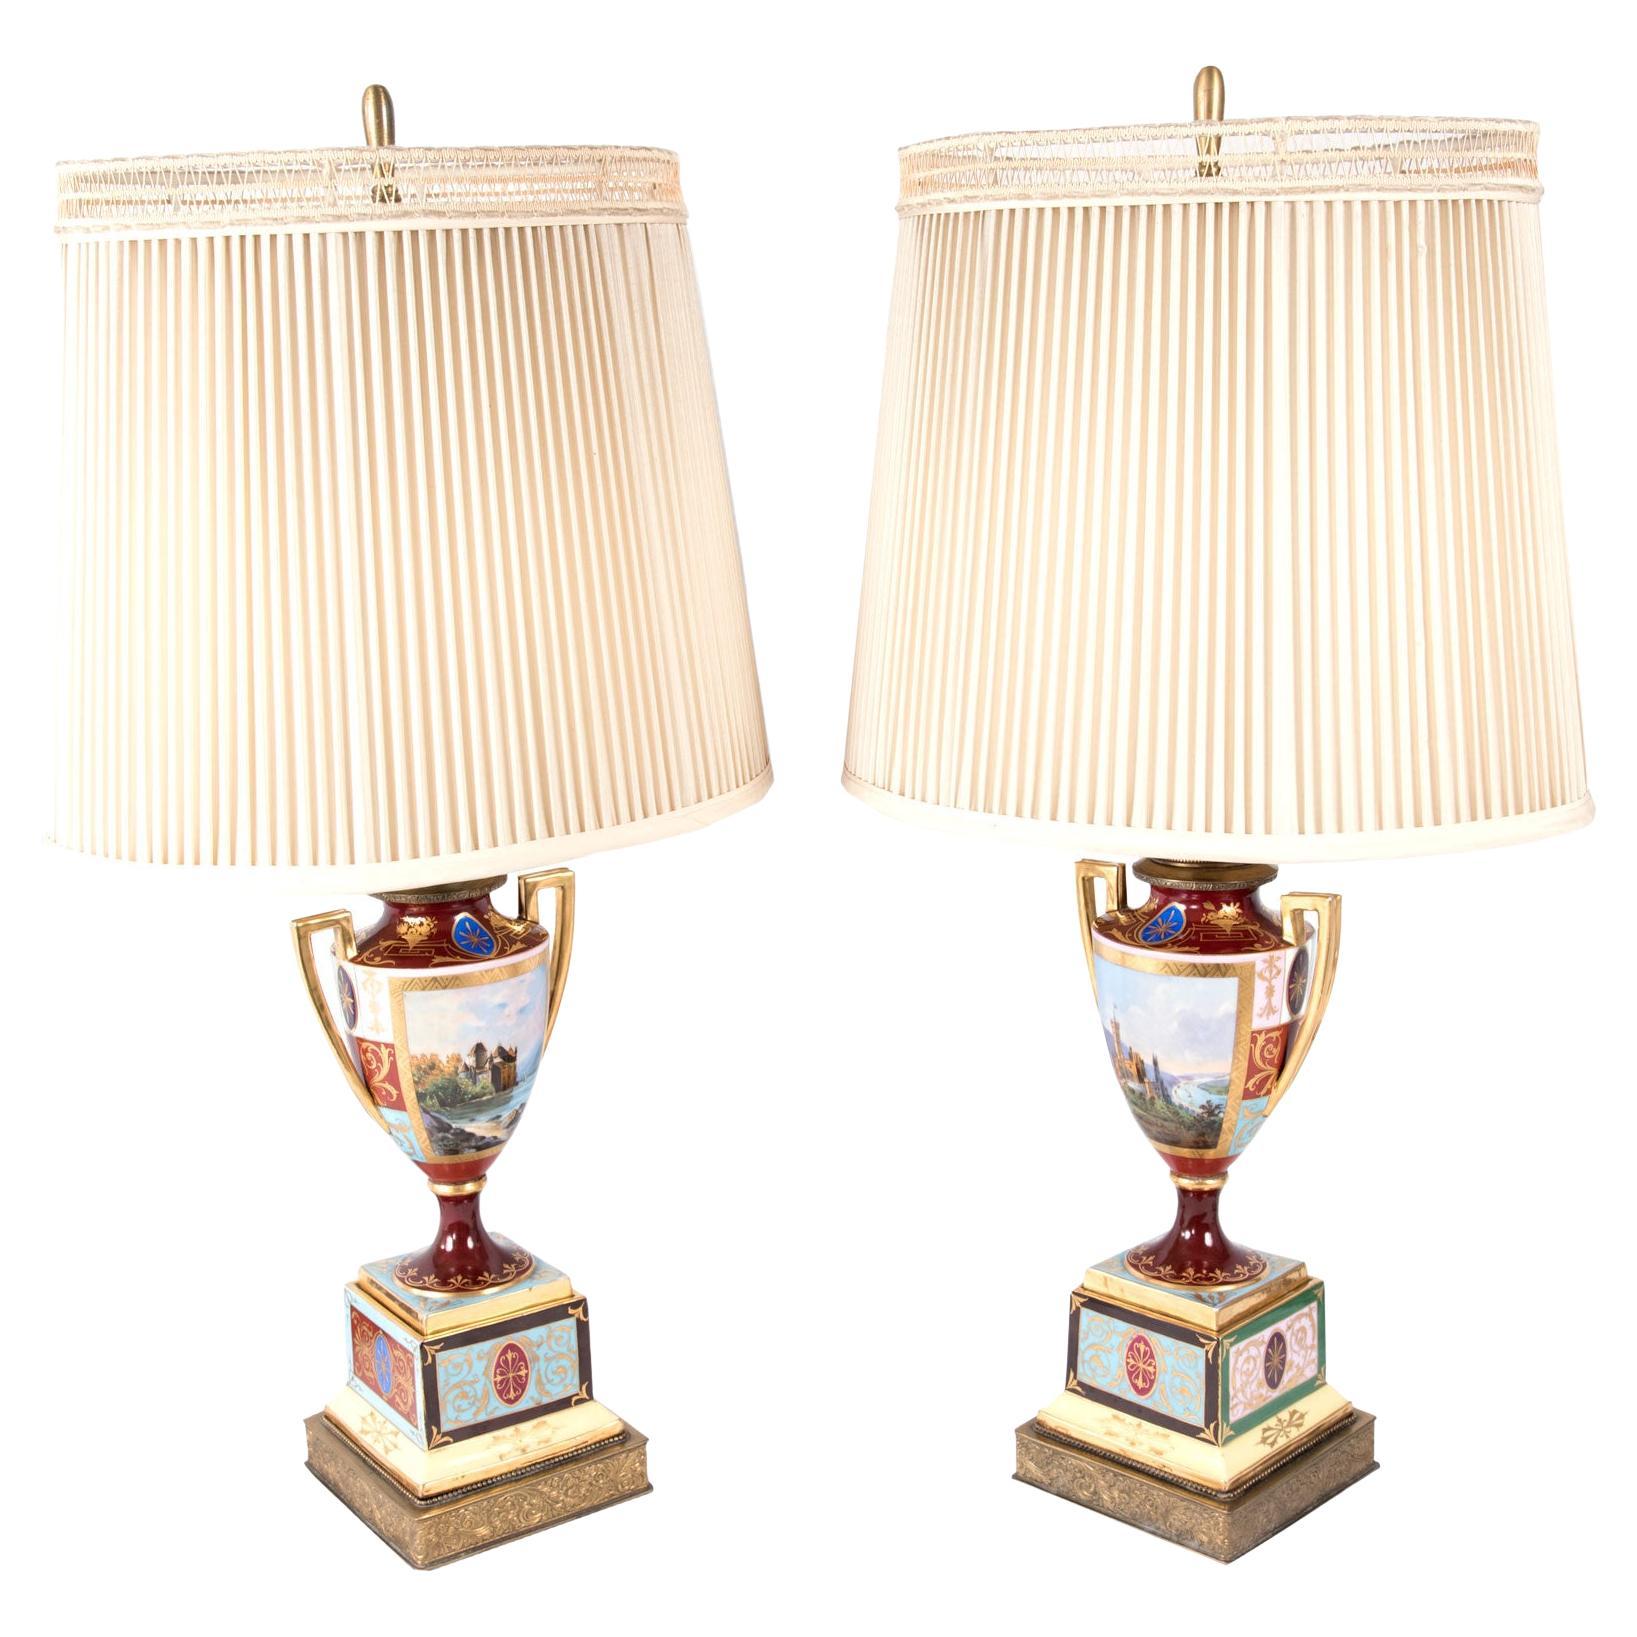 Pair of Neoclassical Royal Vienna Porcelain Urn-Shaped Table Lamps For Sale